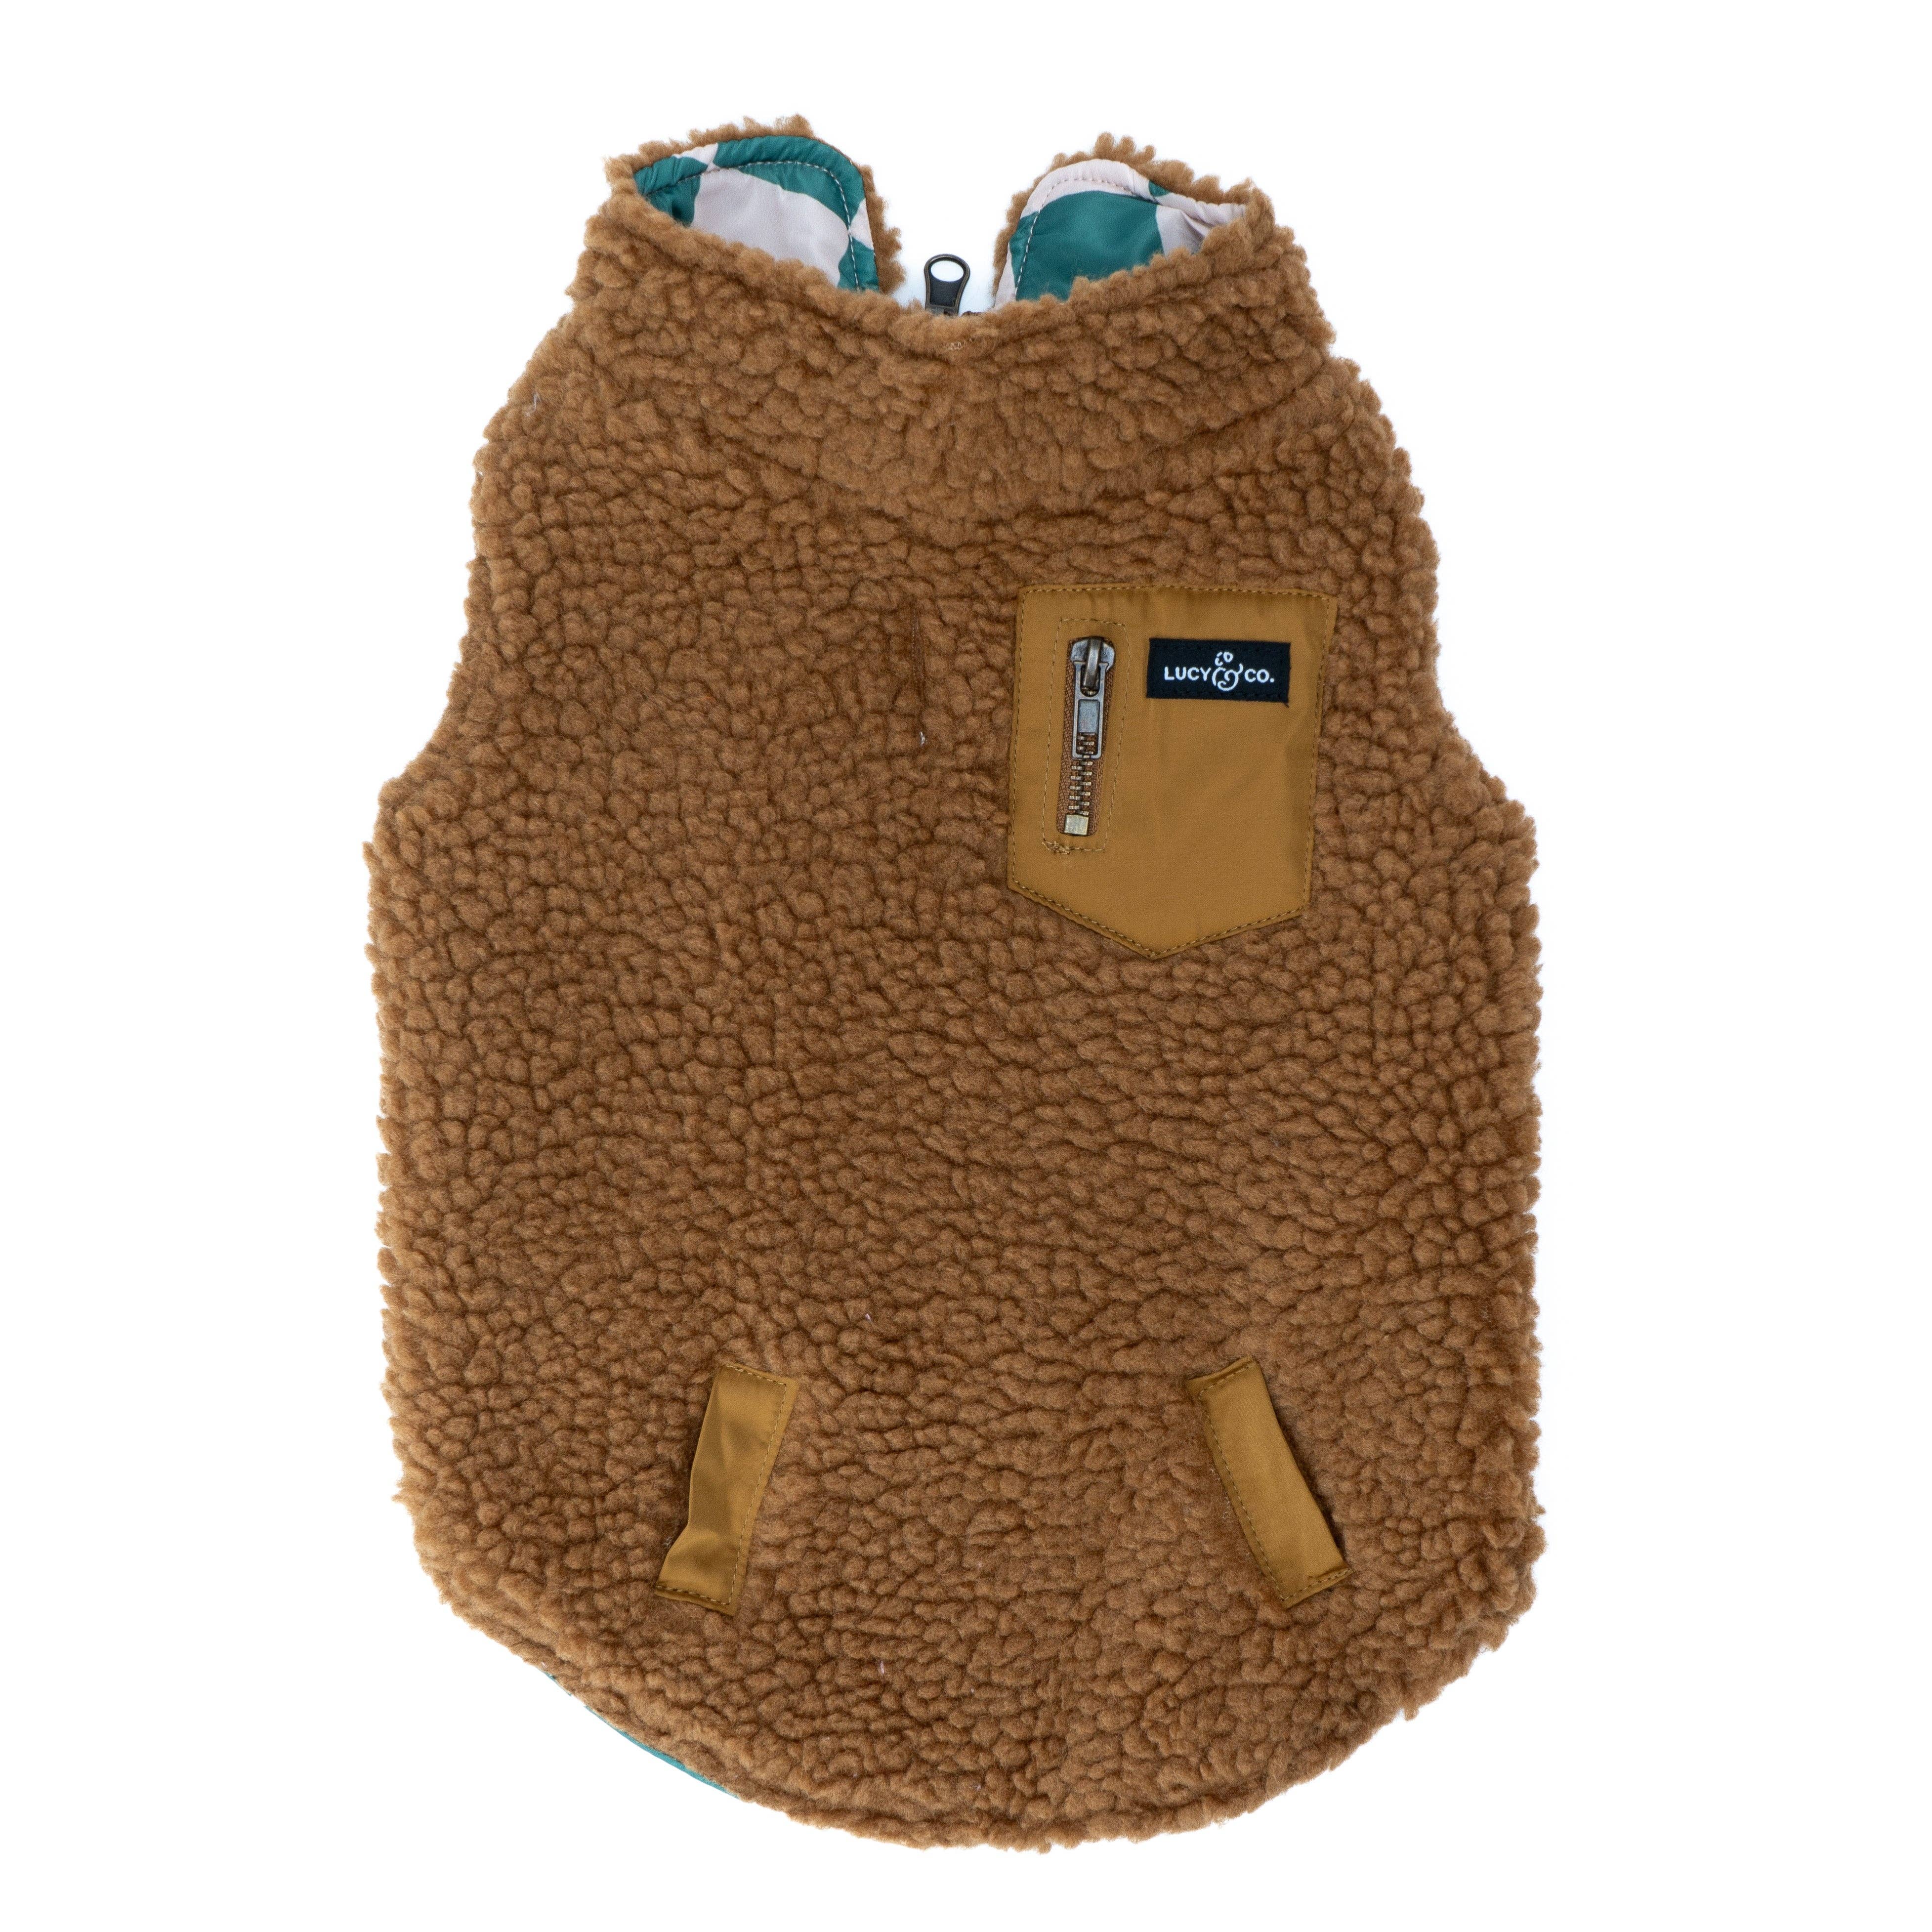 The You're a Square Reversible Teddy Vest: Large